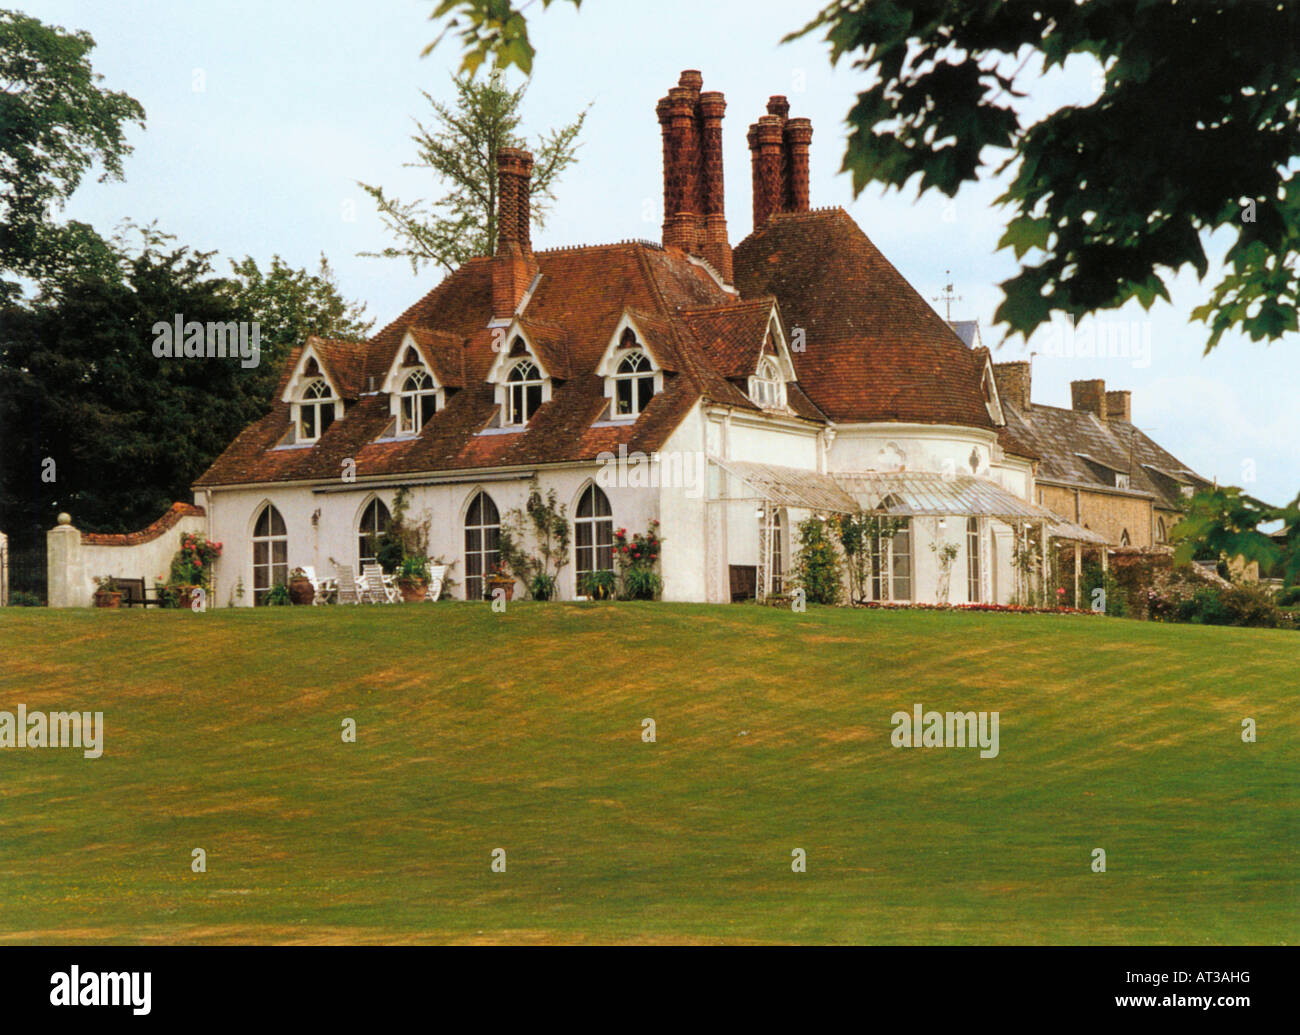 Edwardian country house with tall chimneys and gable windows Stock Photo